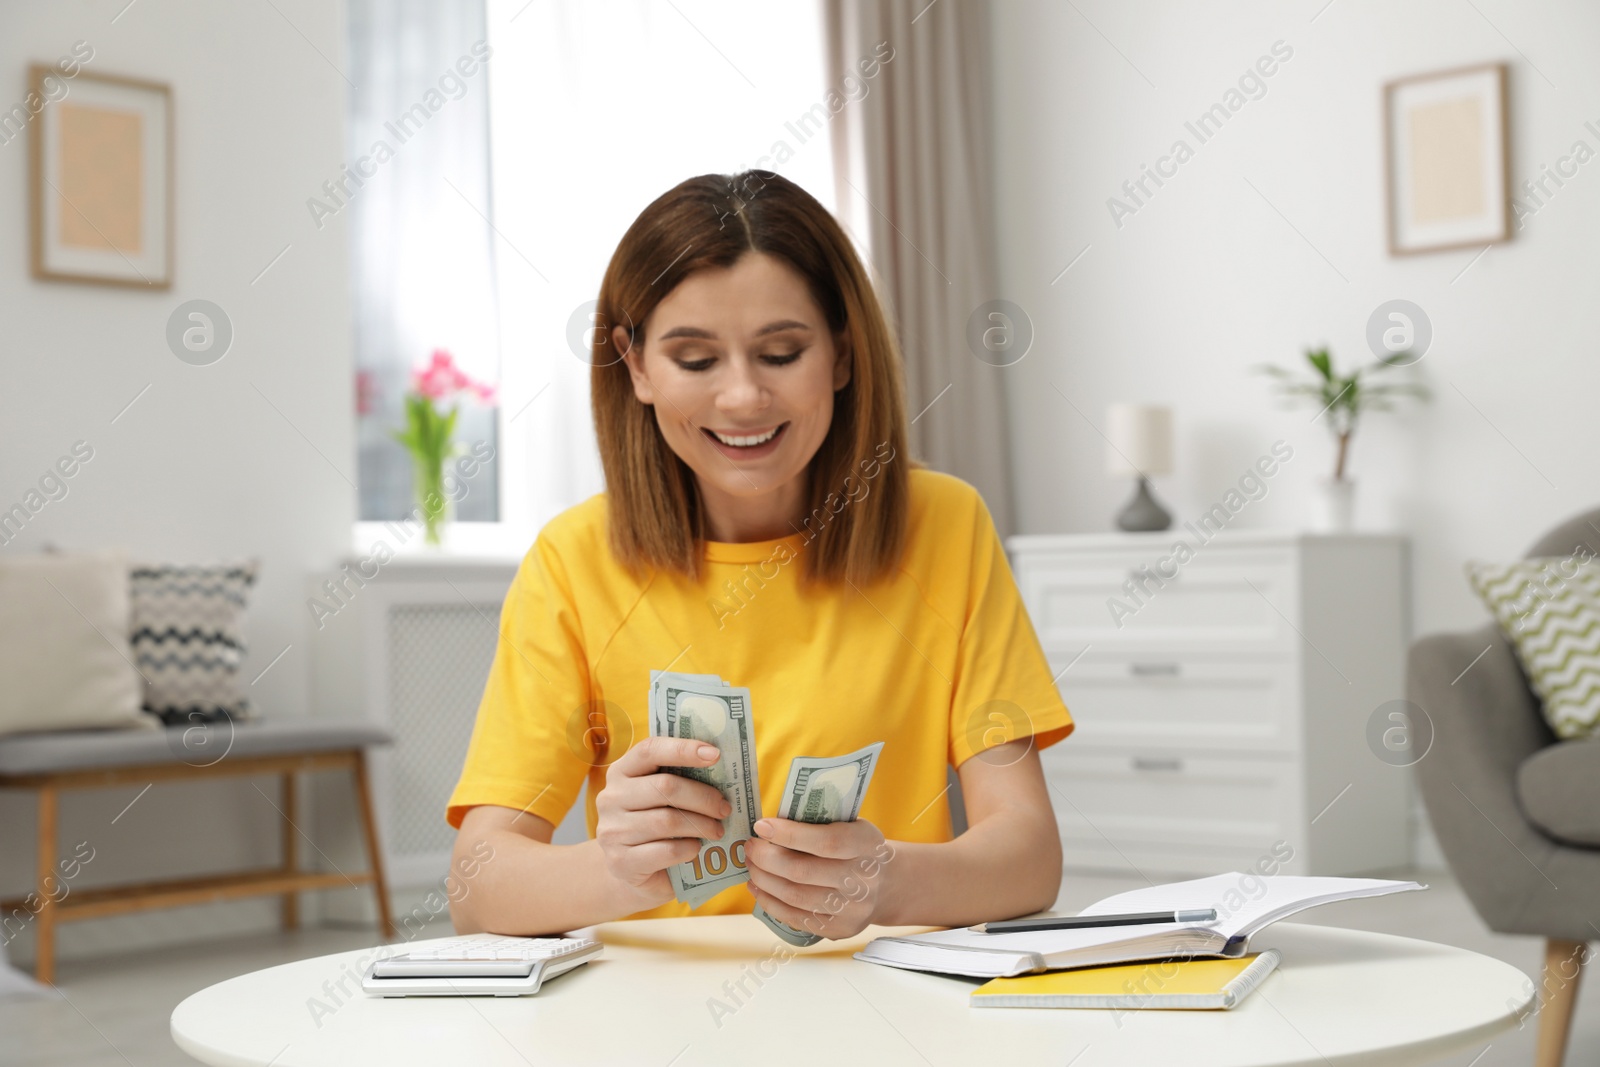 Photo of Smiling woman counting money at table indoors